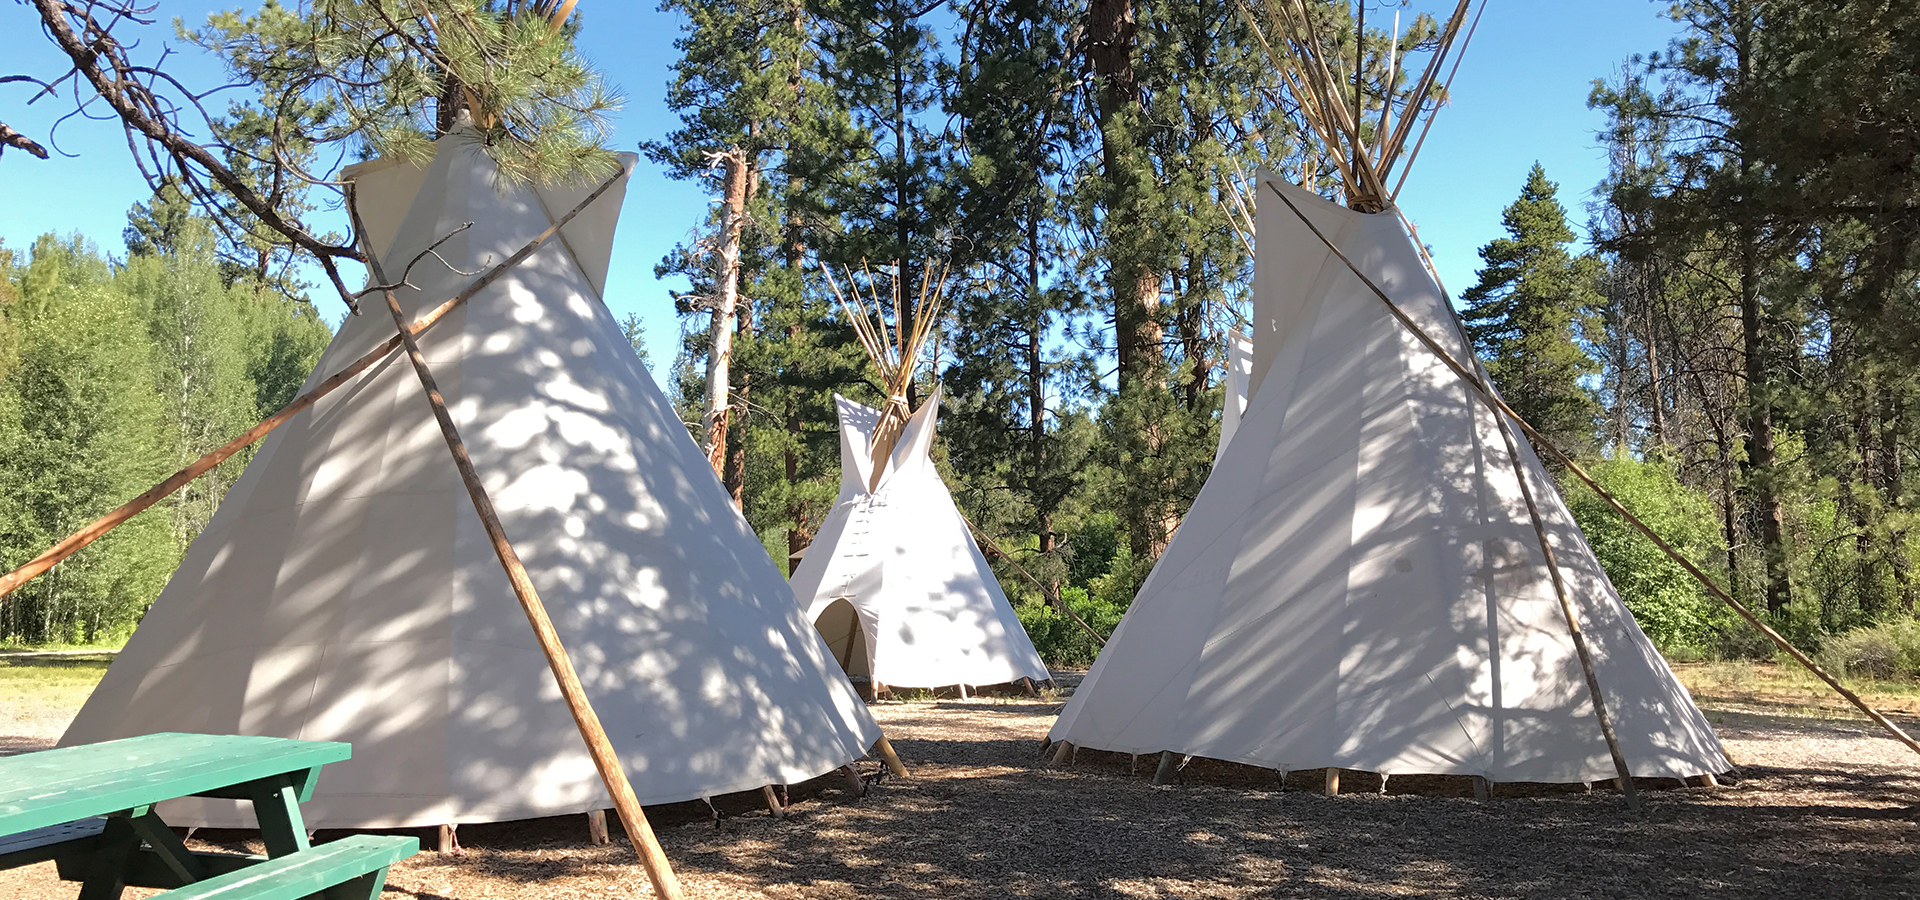 The teepees at Shevlin Park.